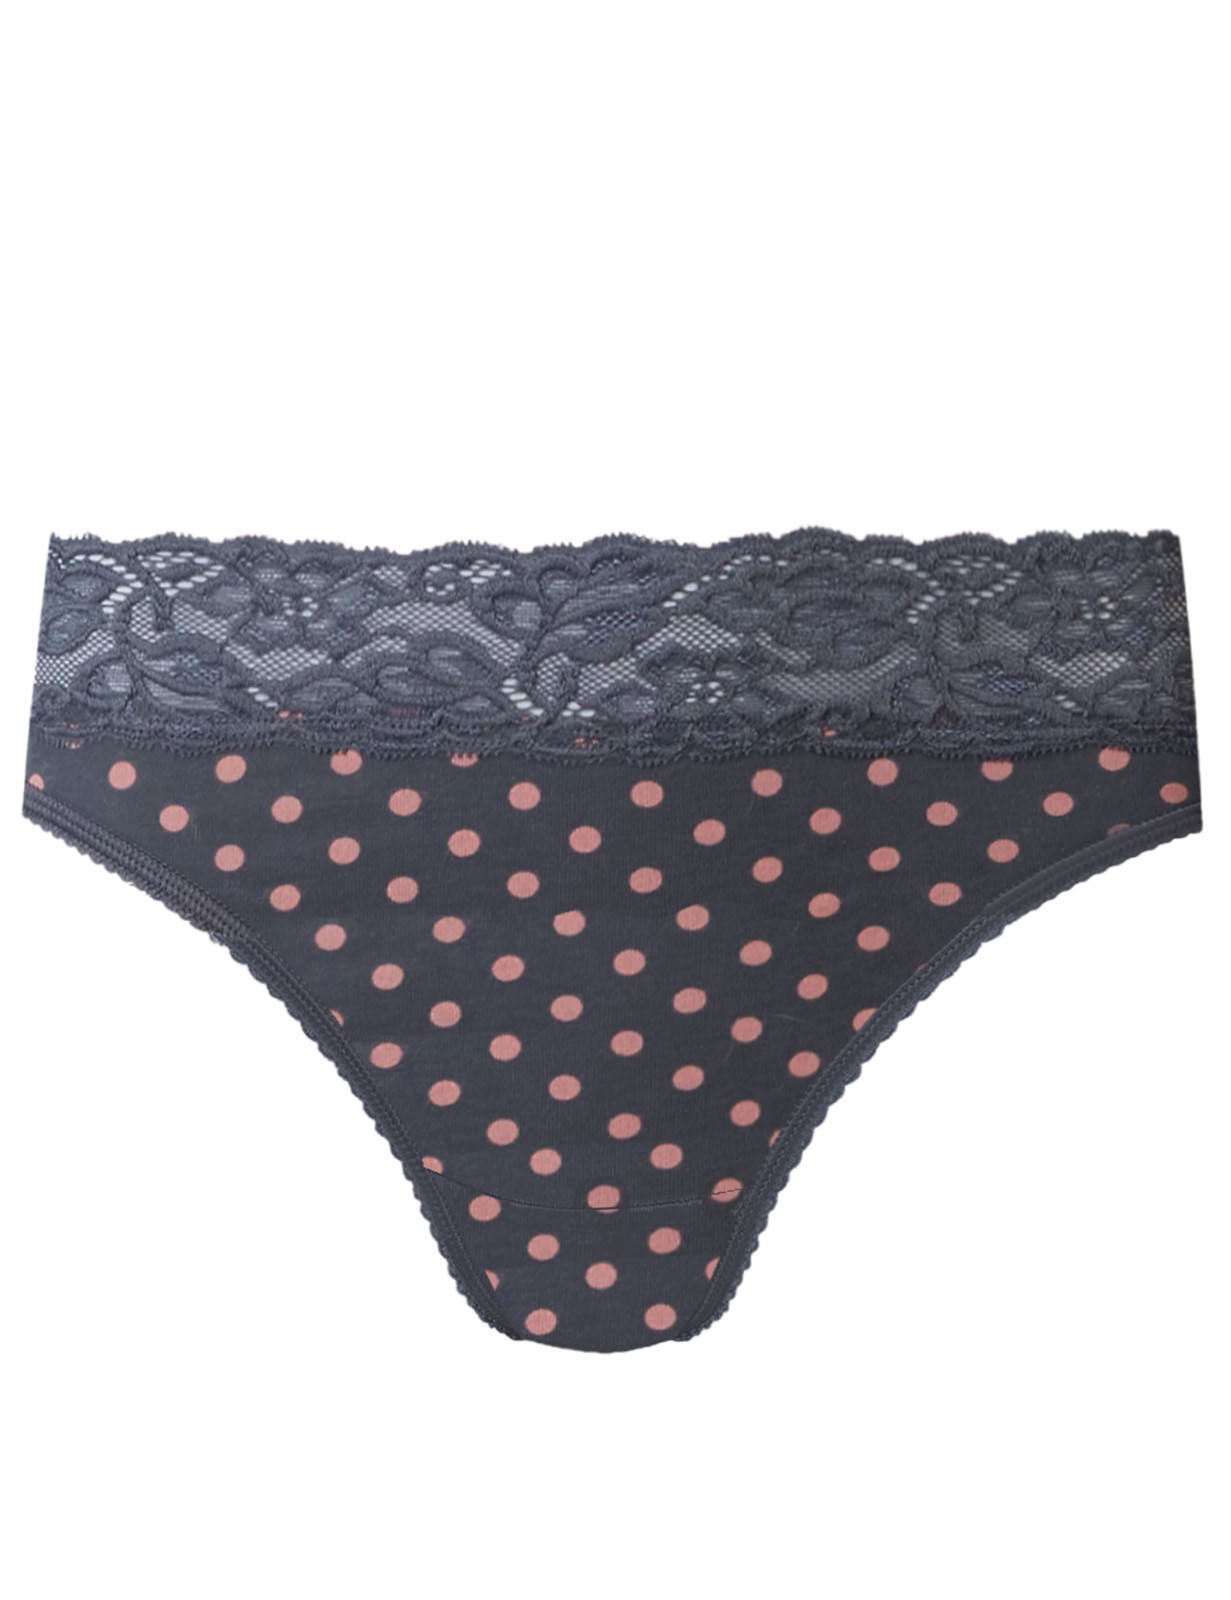  - - GREY Cotton Rich Lace Waist Spotted Thong - Size 8 to 20